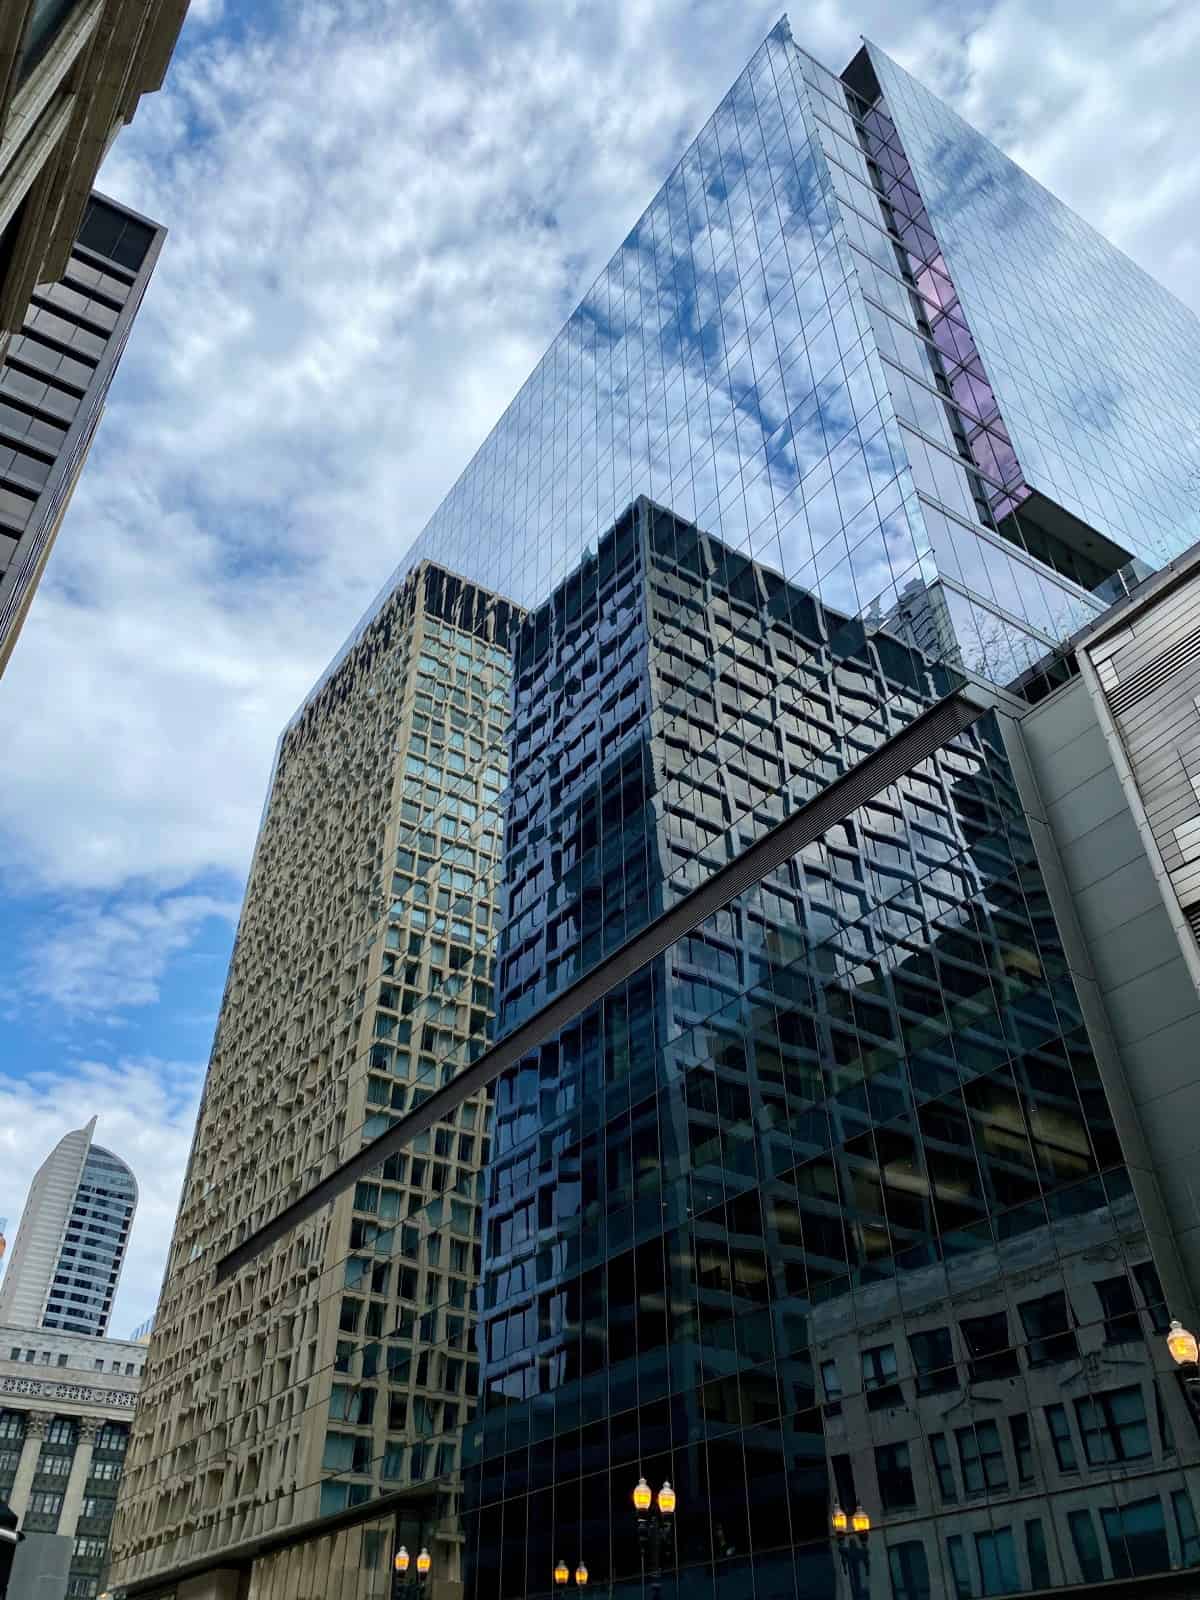 Tips for photographing Chicago, urban photography tips - reflections of buildings in other buildings is a must